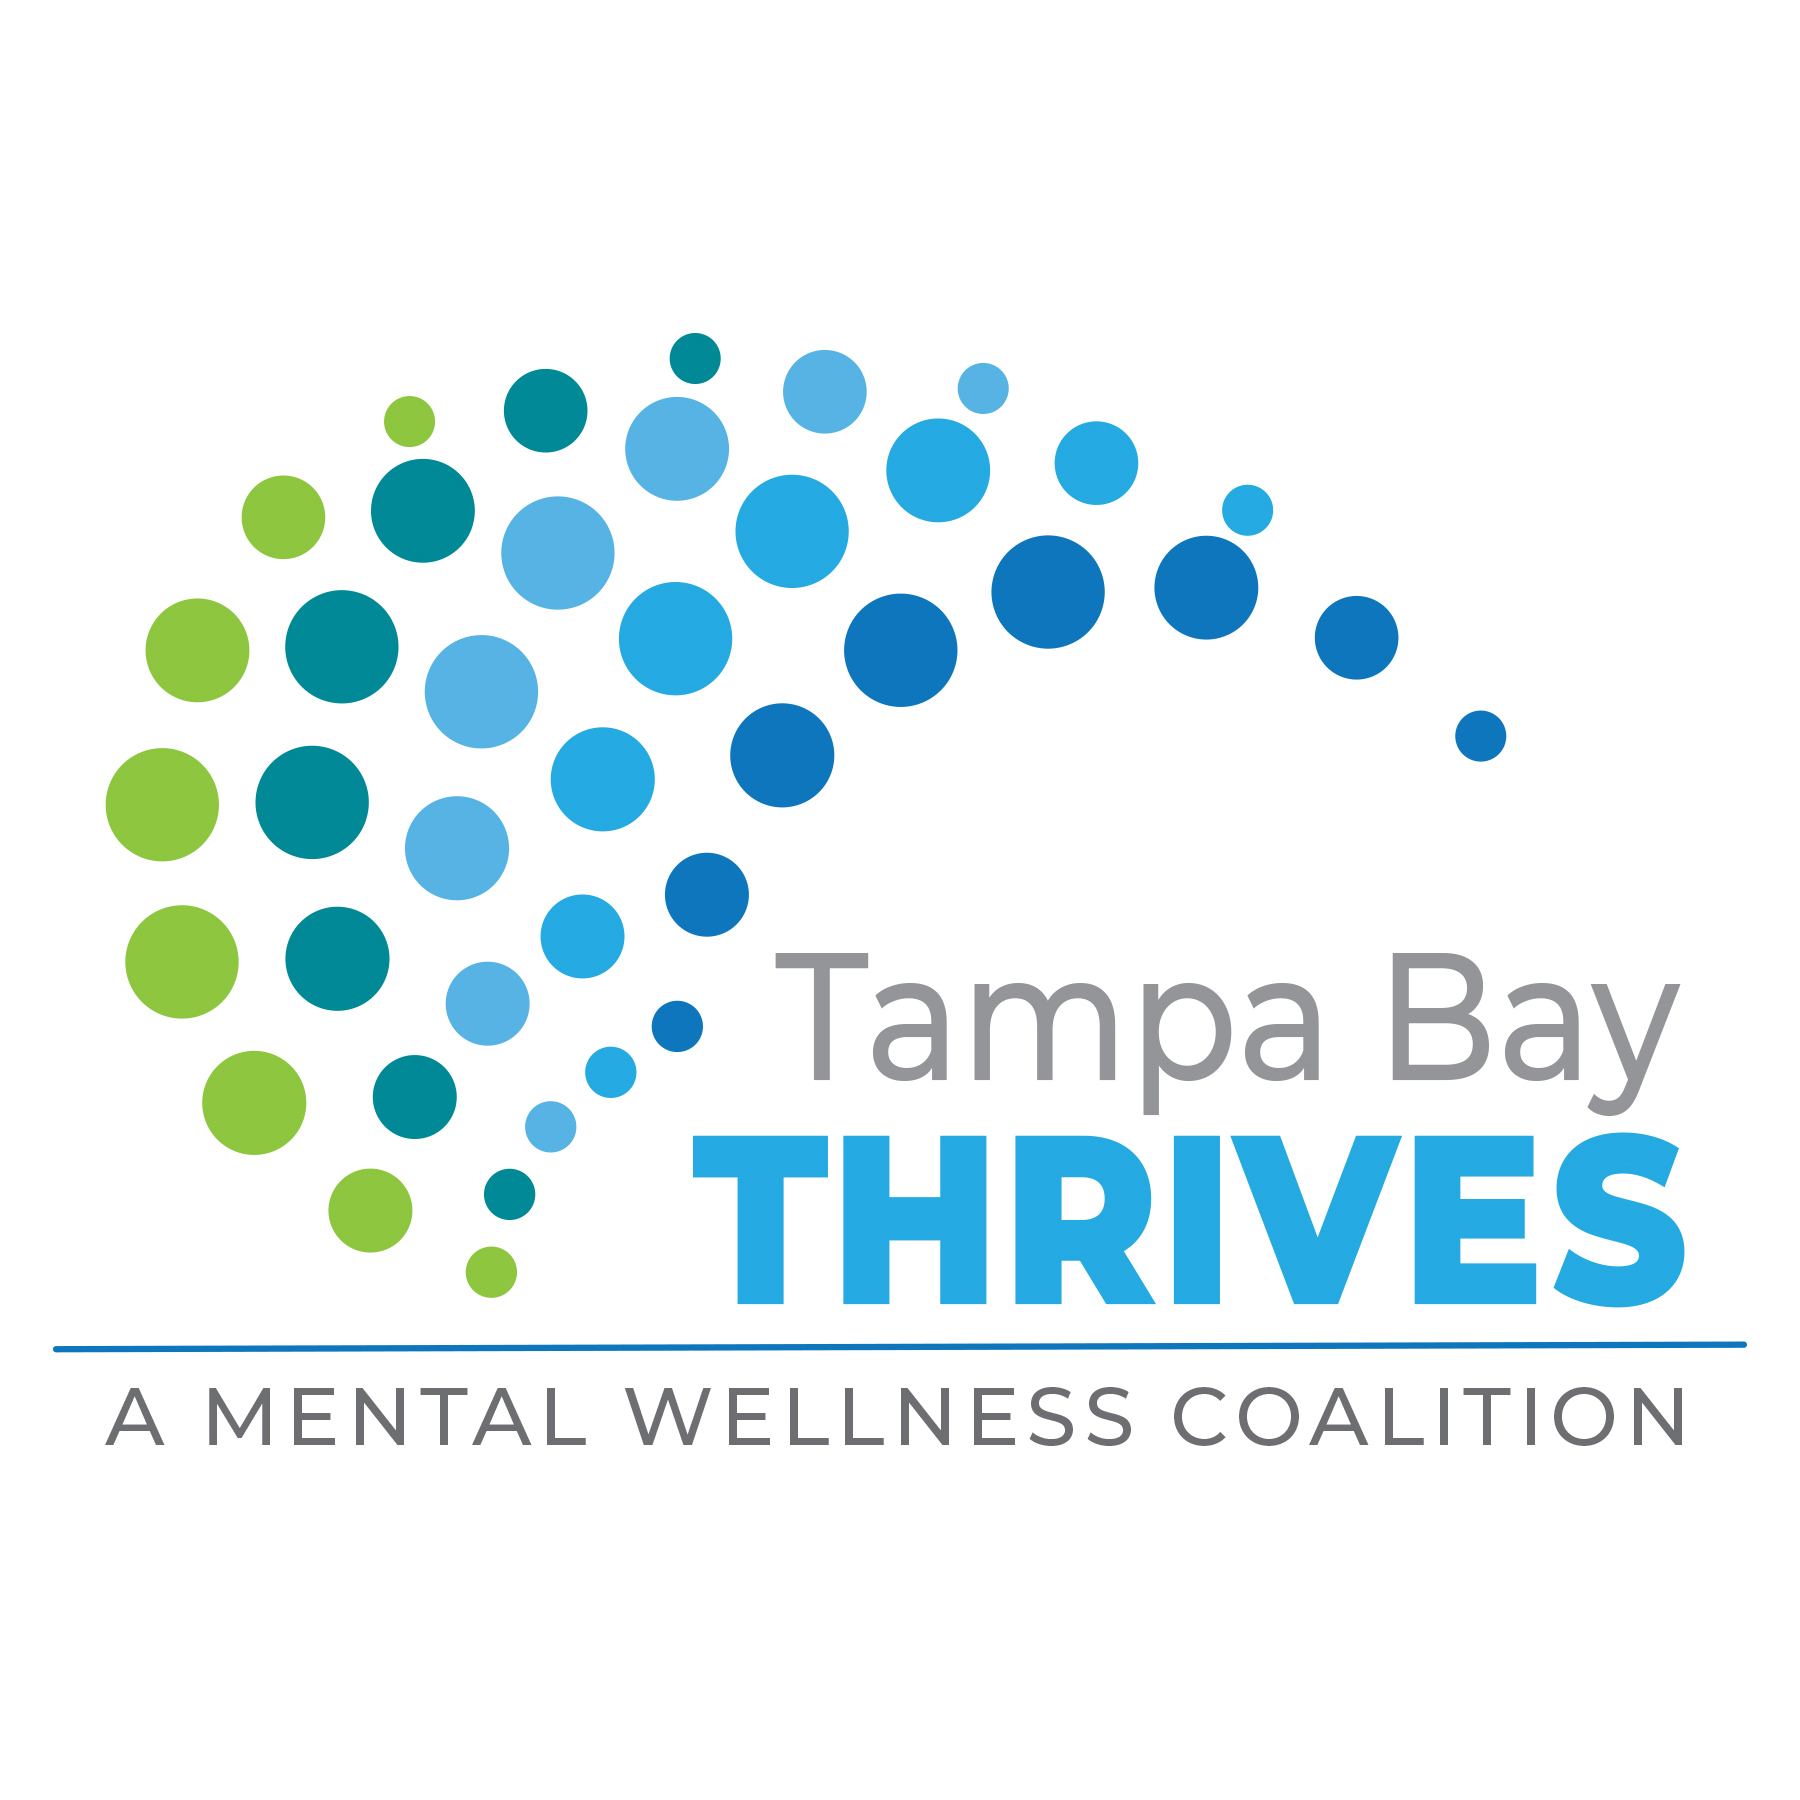 Project Opioid brings a new mission to Tampa Bay